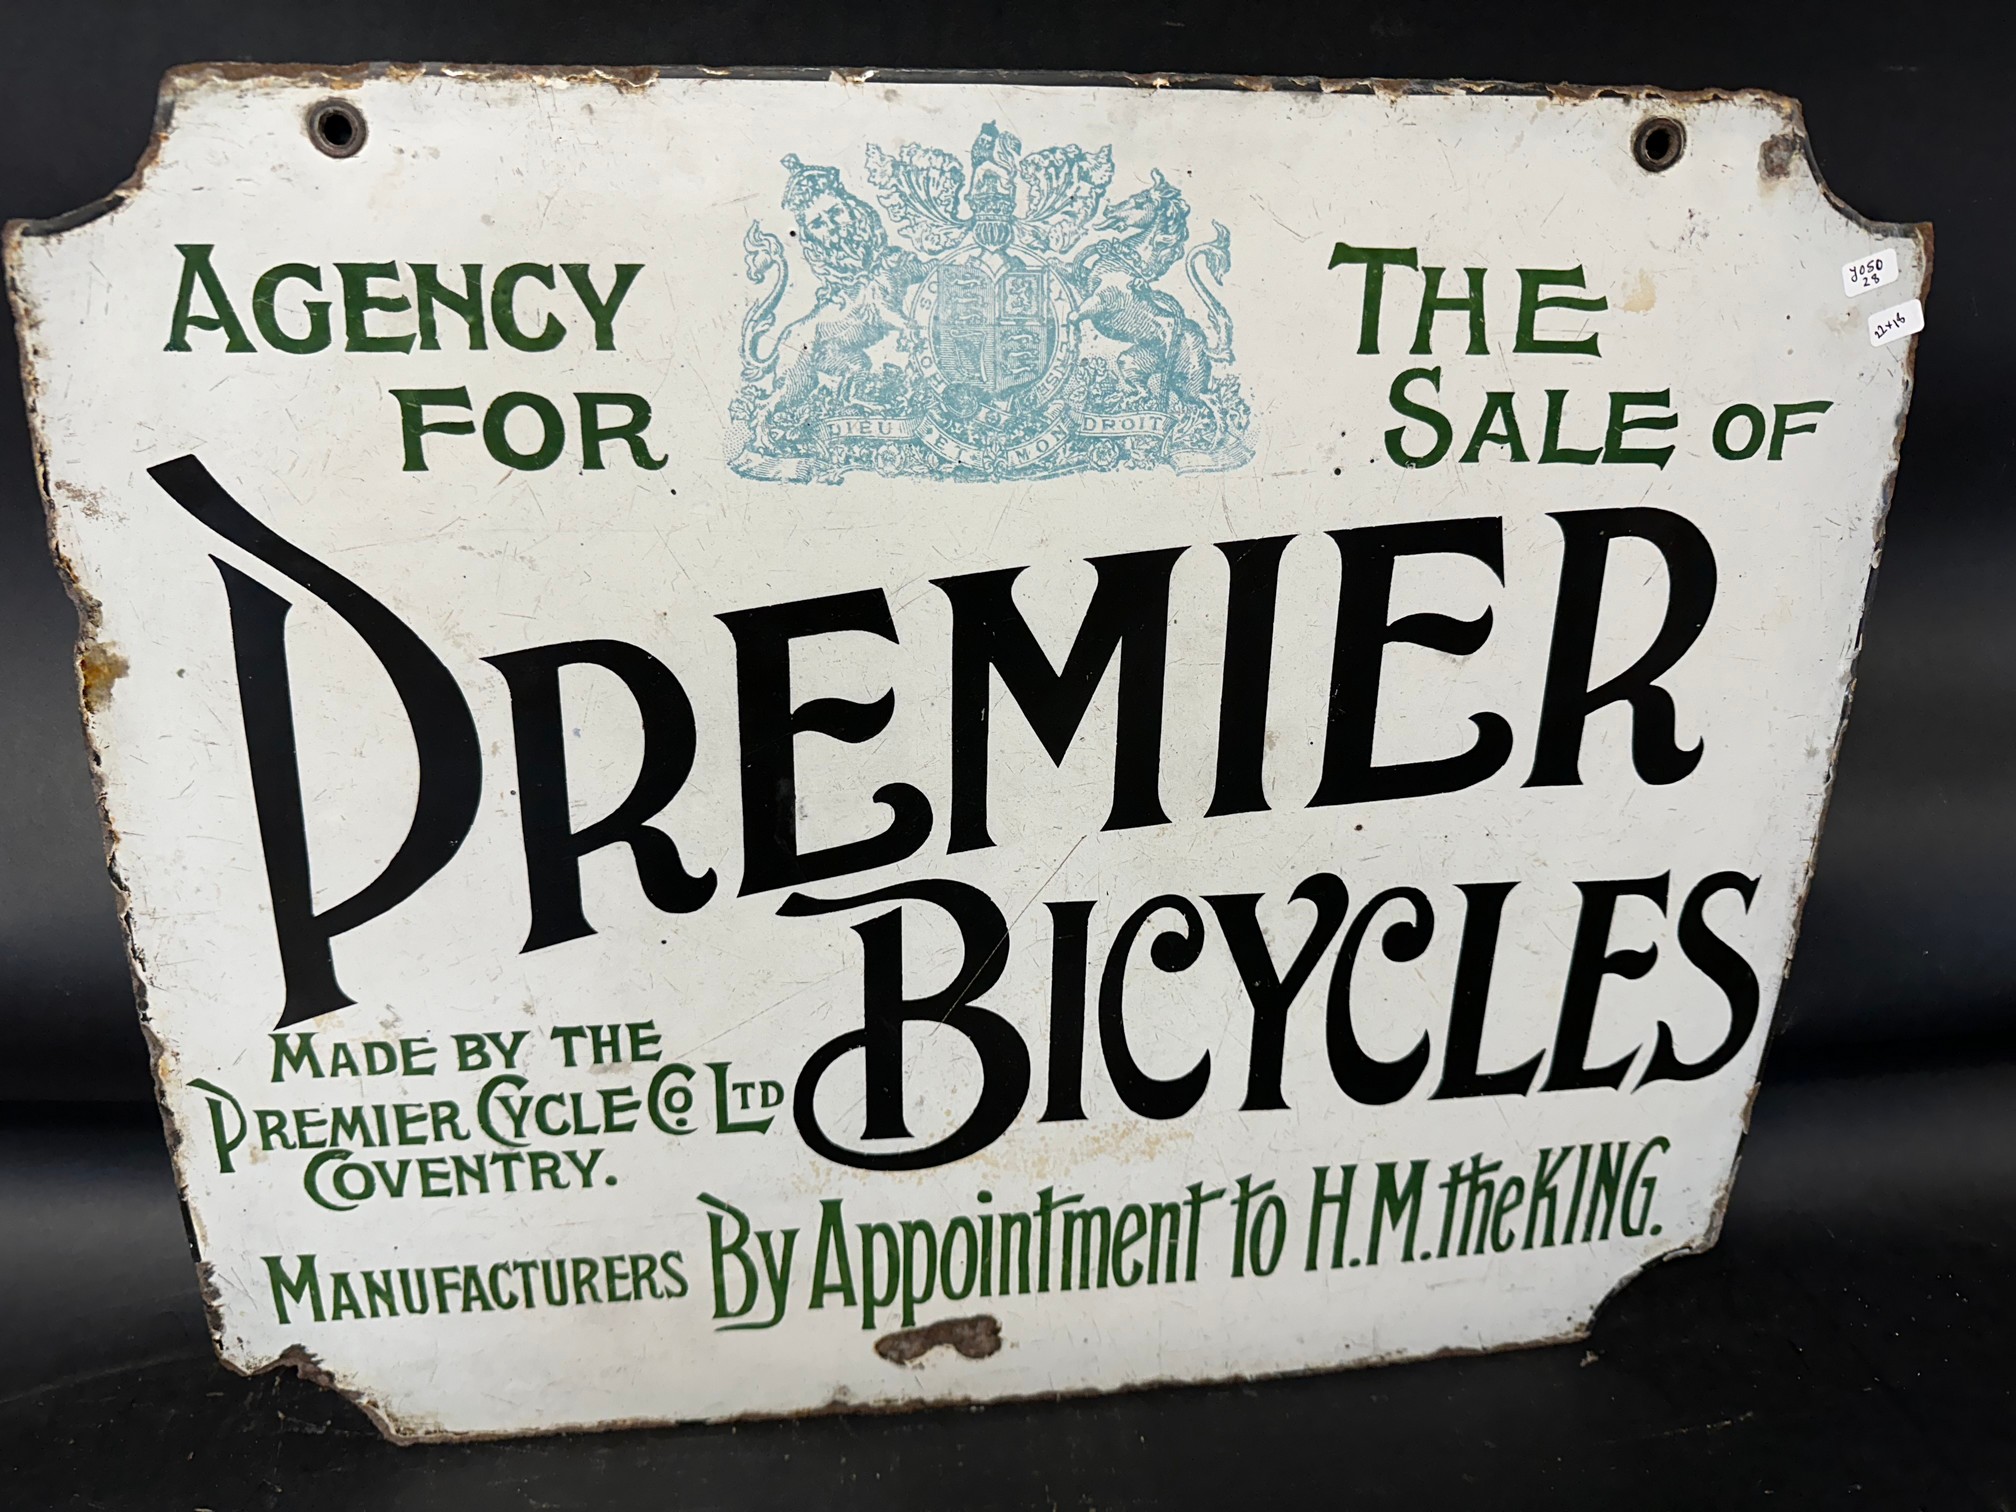 A Premier Bicycles double sided enamel advertising sign by the Premier Cycle Co. Ltd. Coventry,